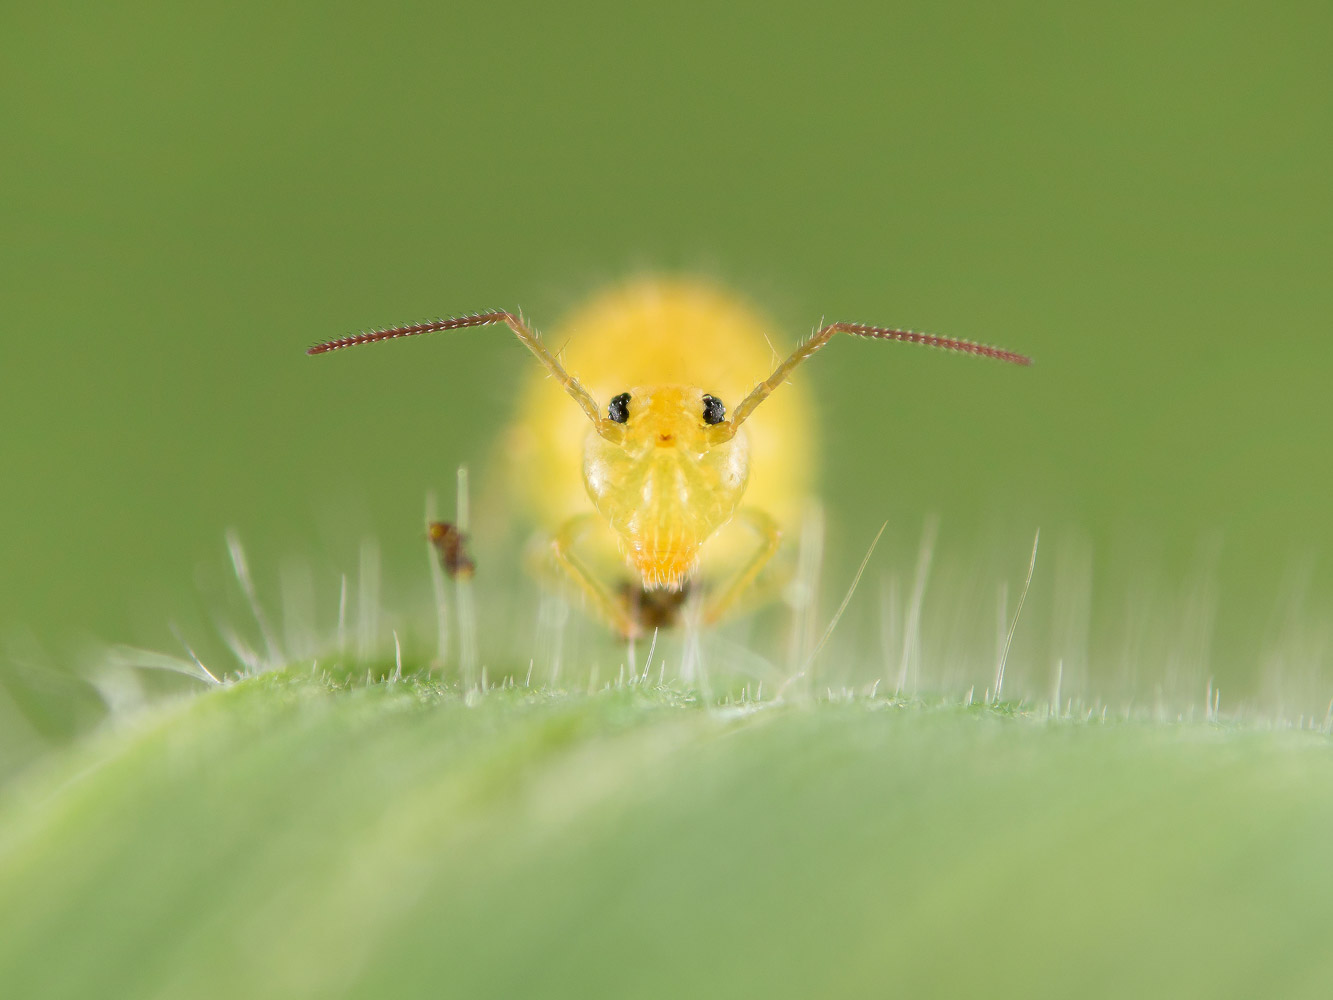 Springtail, © Marc Brouwer, Runner up: Photographer of the Year 2017, The Royal Society of Biology annual photography competition